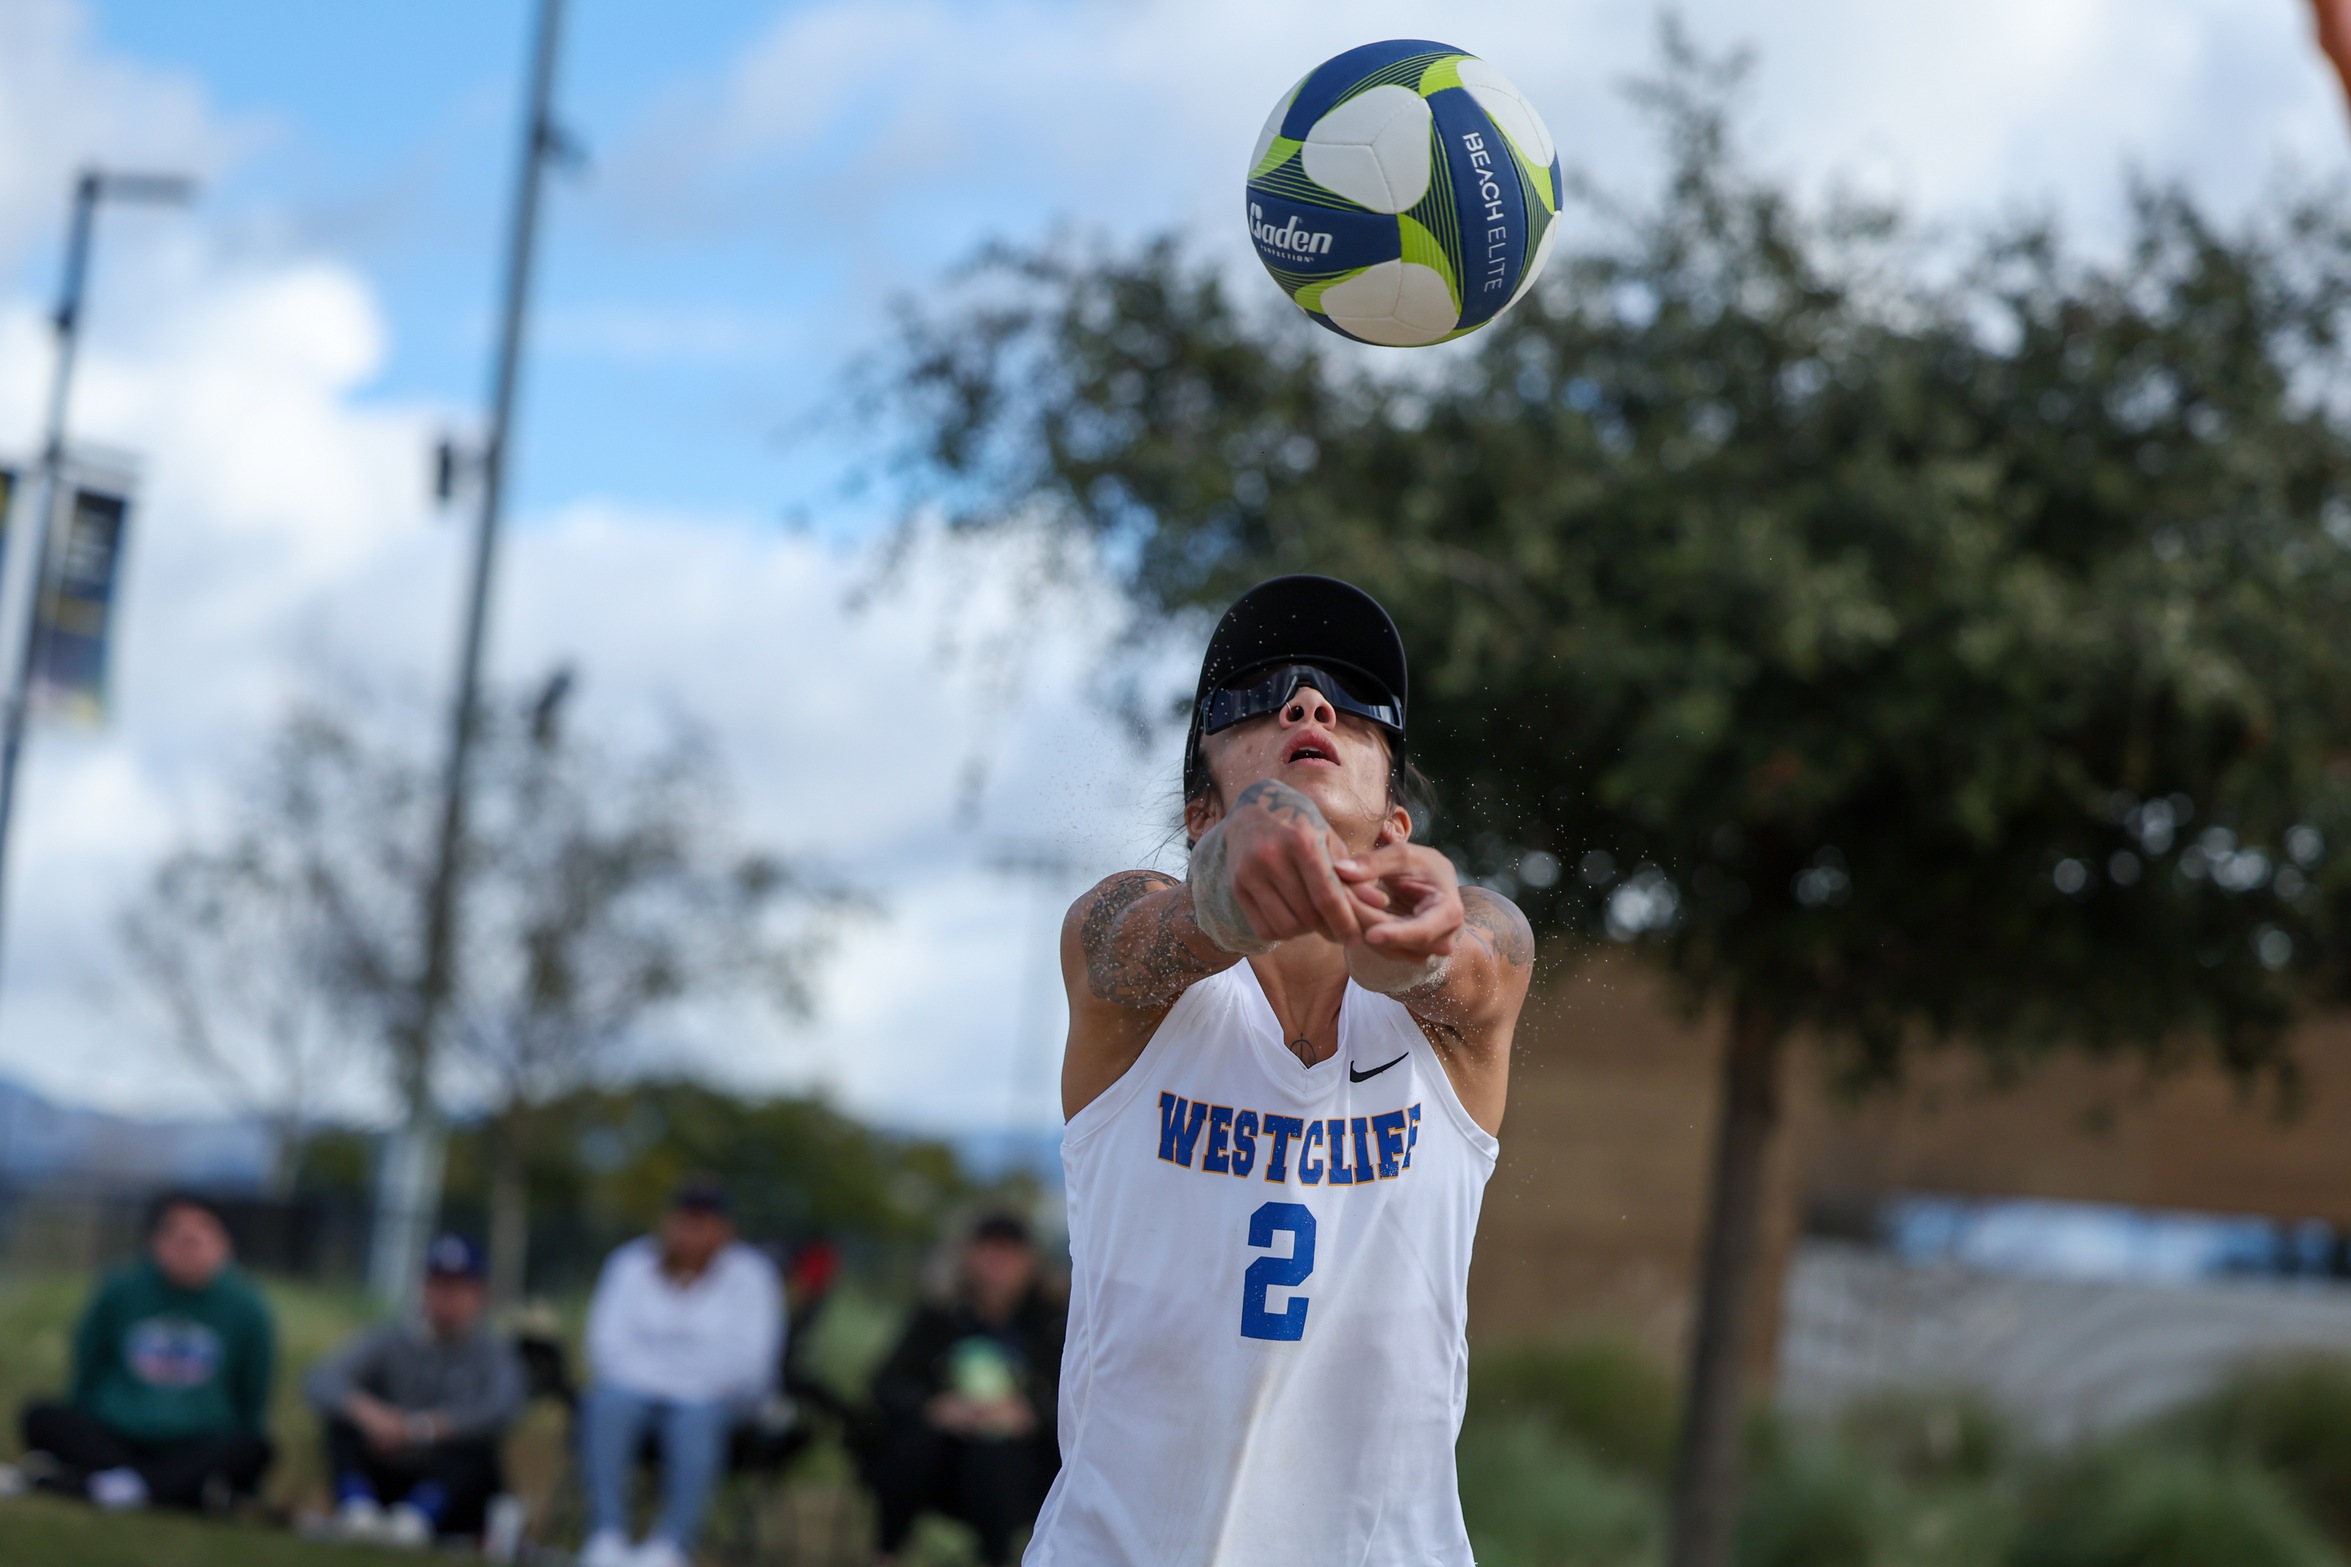 Westcliff advance to the Semifinals of the NAIA West Qualifier